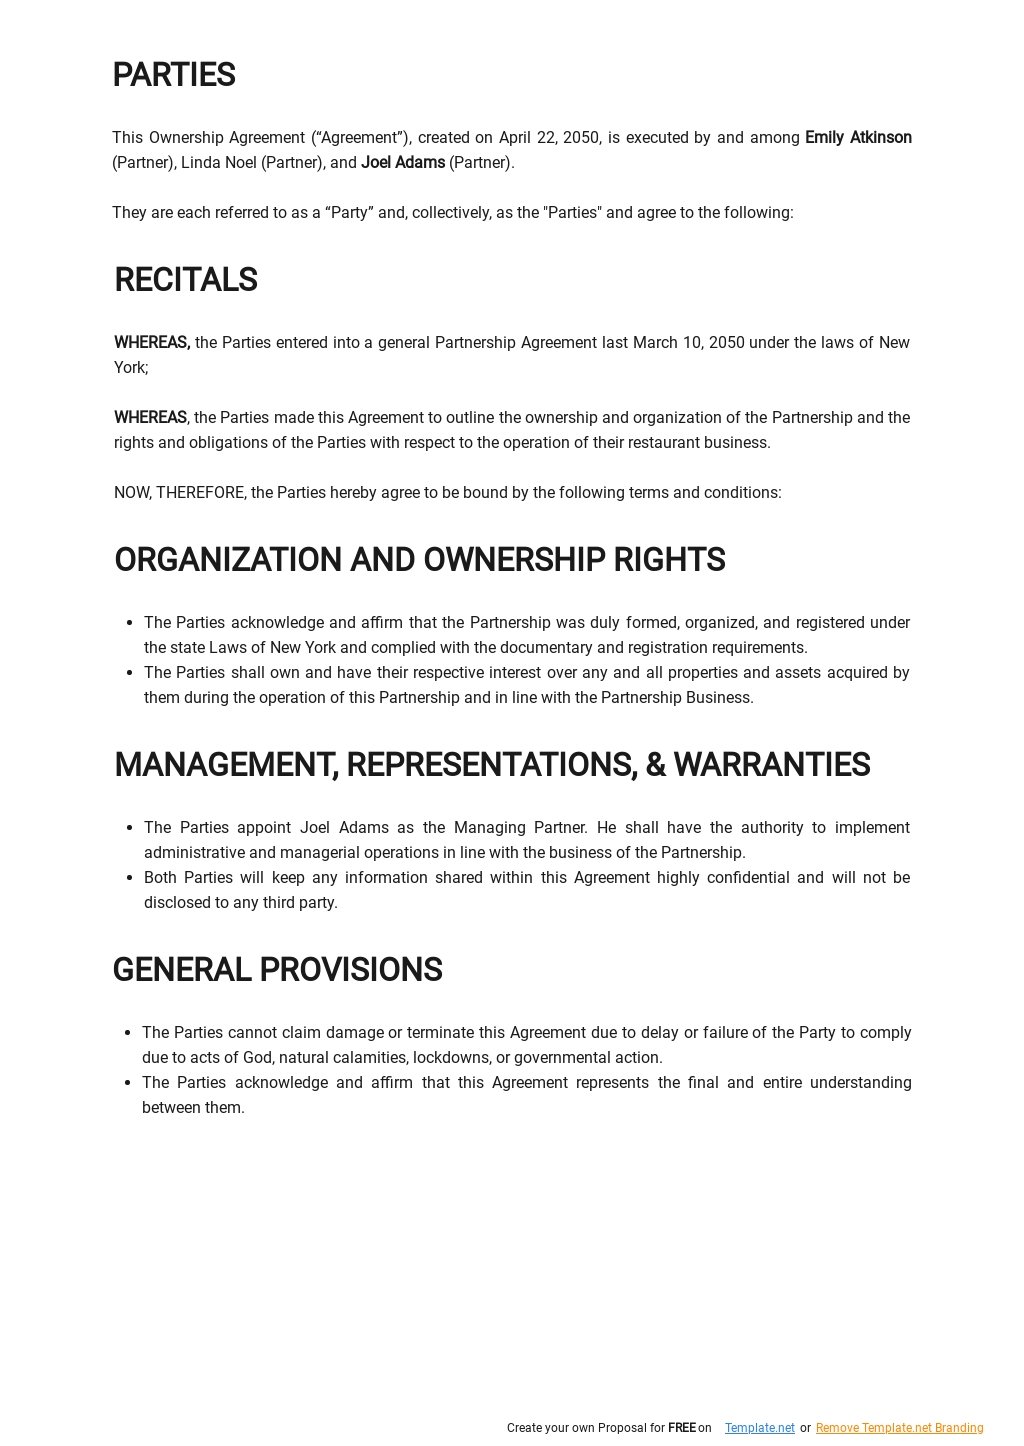 Copyright Ownership Agreement Template